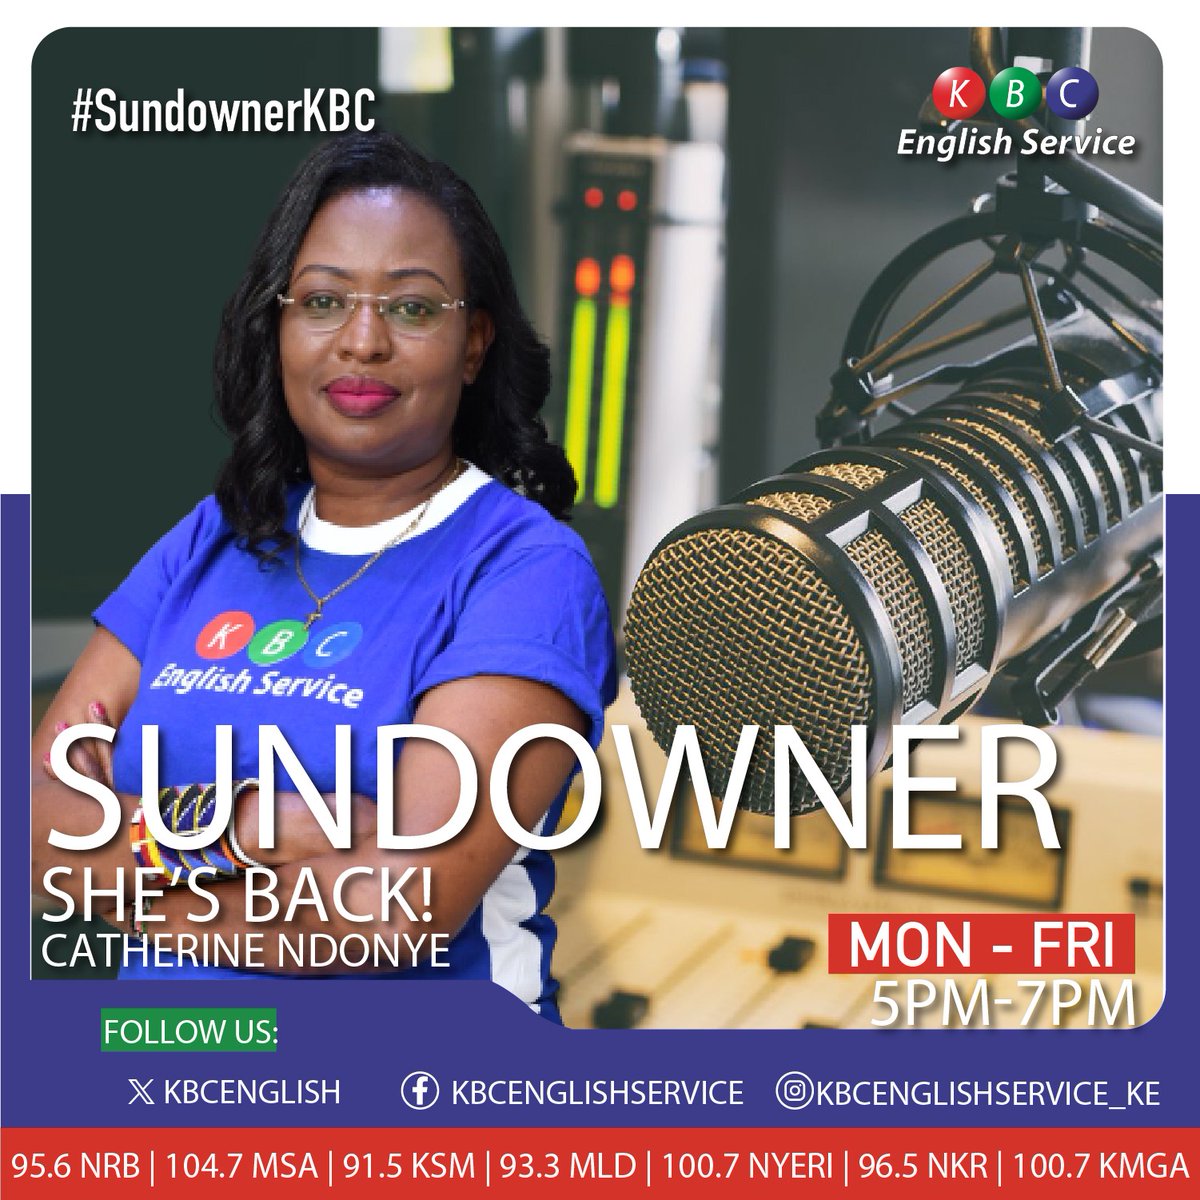 Hey! How have the streets been? Glad to be back! See you at 17.00 hrs on #SundownerKBC Honor lies in honest toil~Grover Cleveland @CatherineNdonye